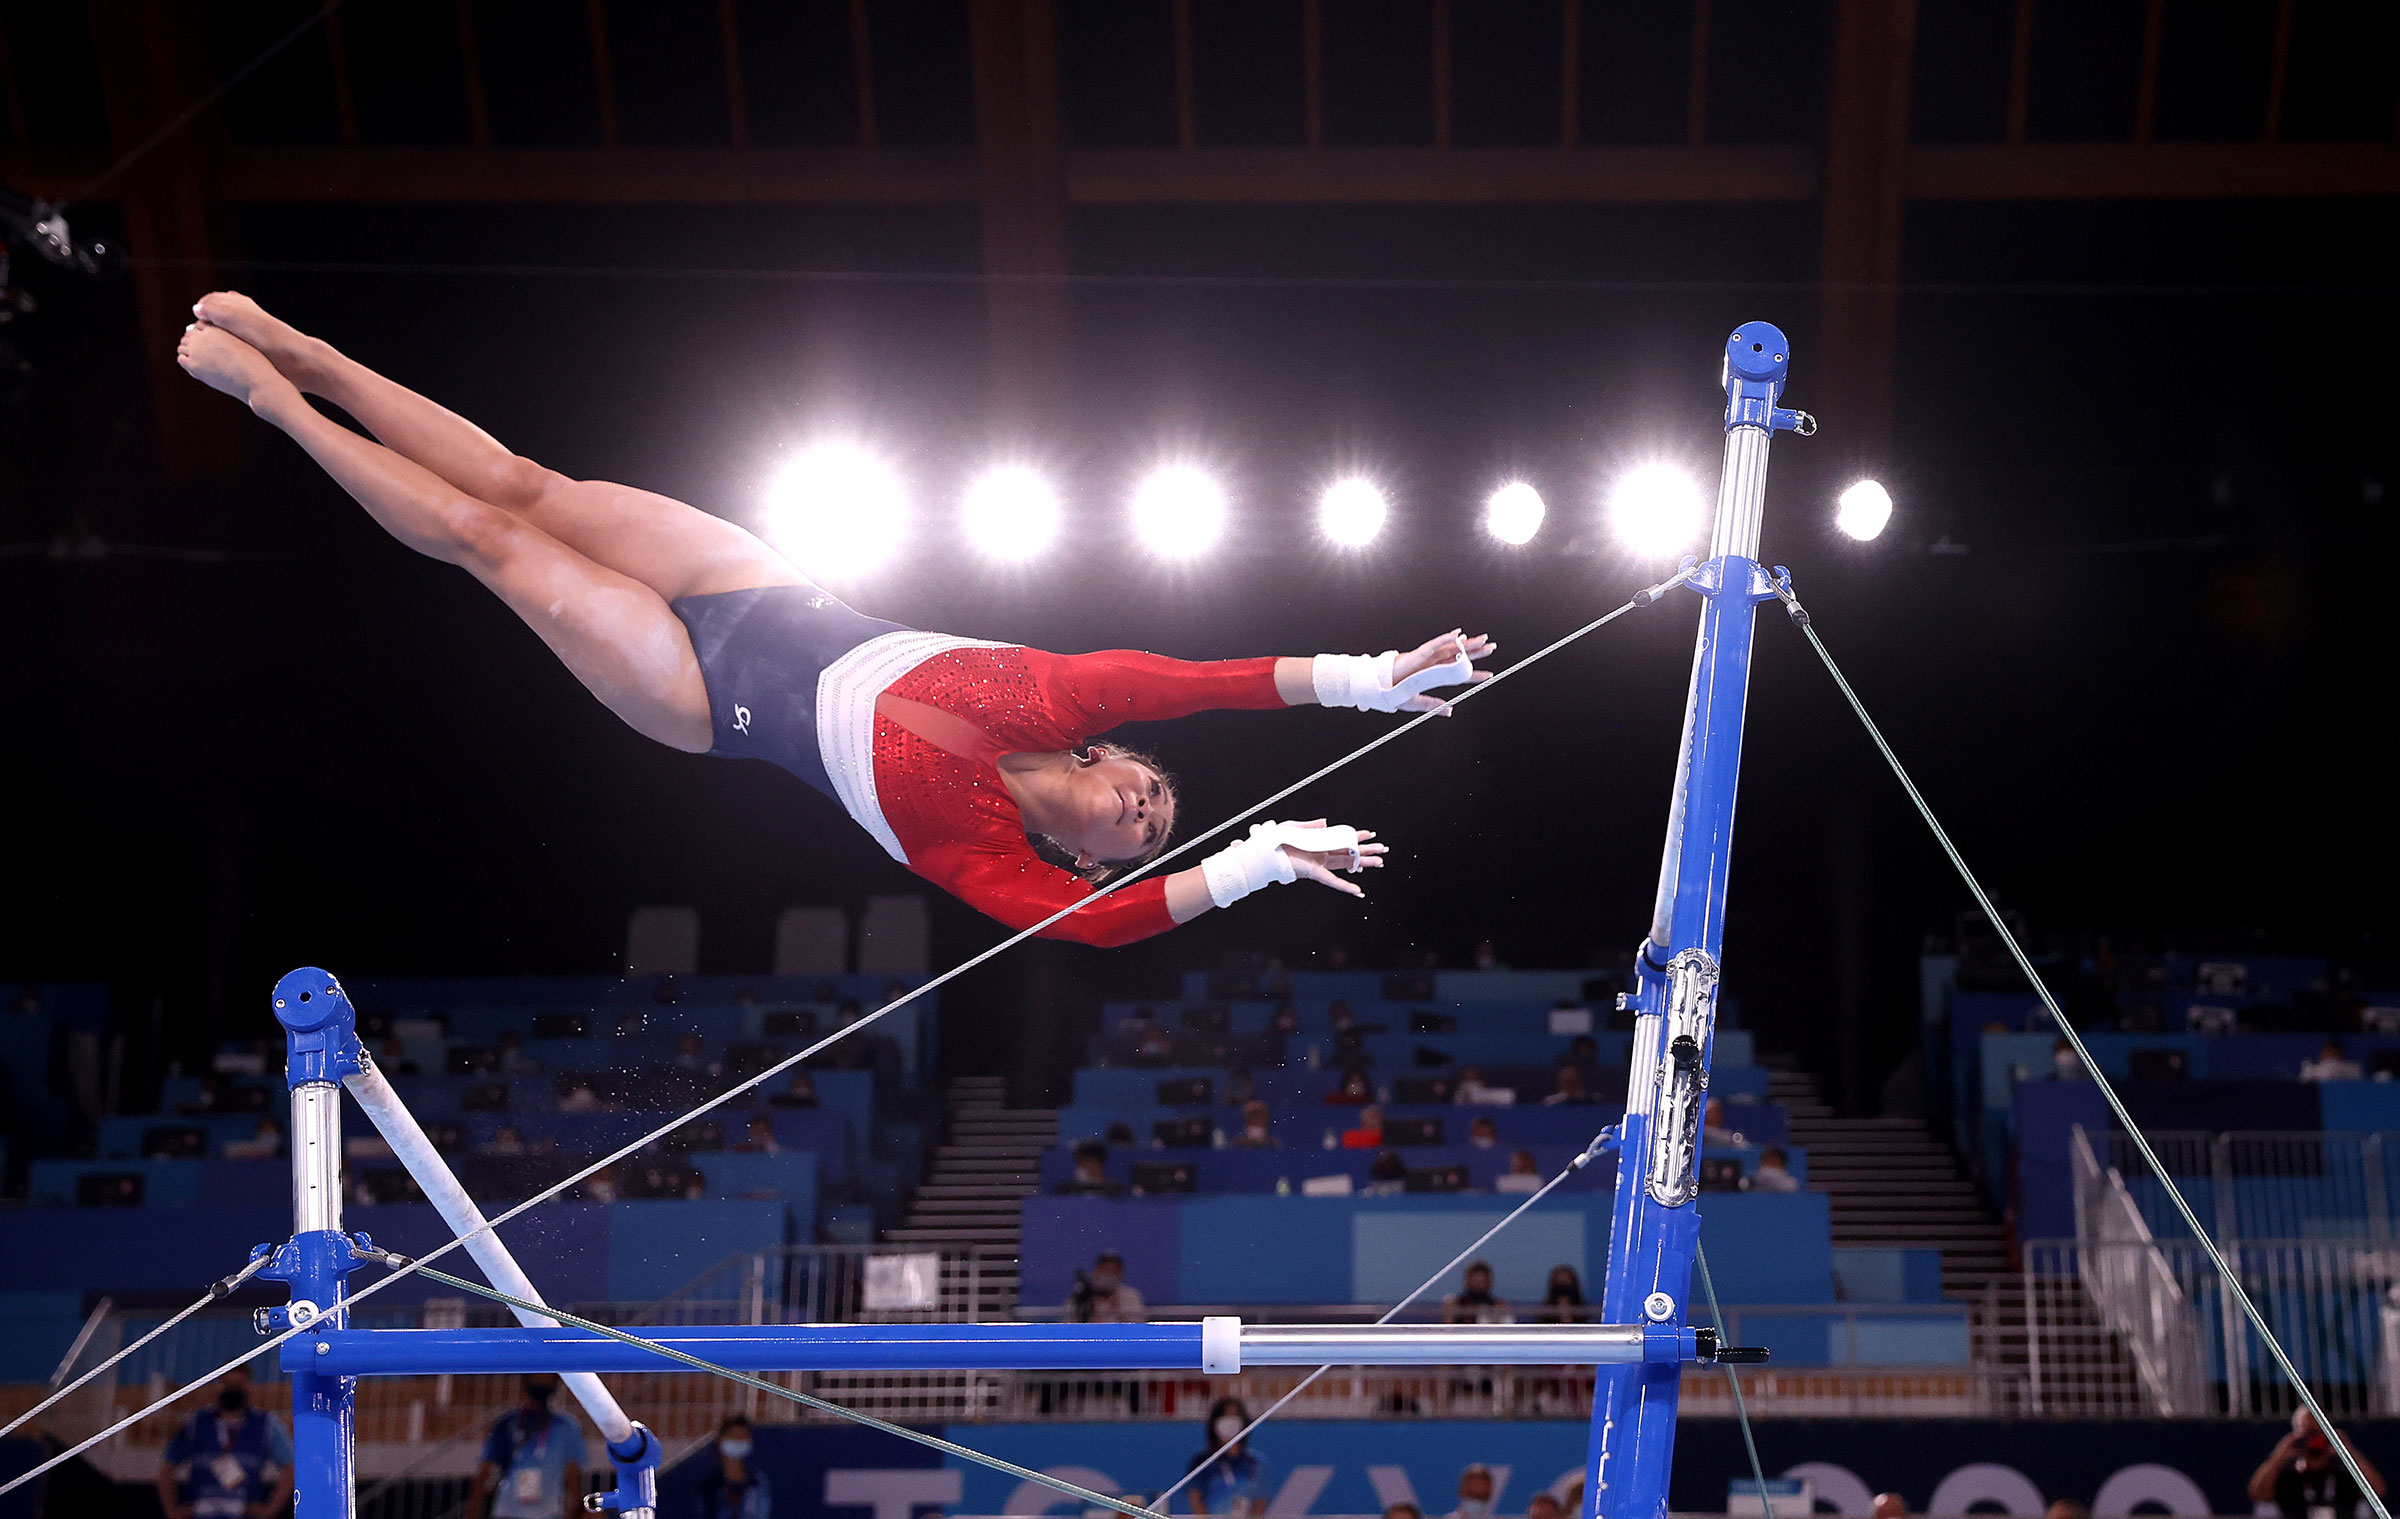 Sunisa Lee of Team United States competes in the uneven bars during the Women's Team Final of the Tokyo 2020 Olympic Games on July 27, 2021. (Laurence Griffiths—Getty Images)